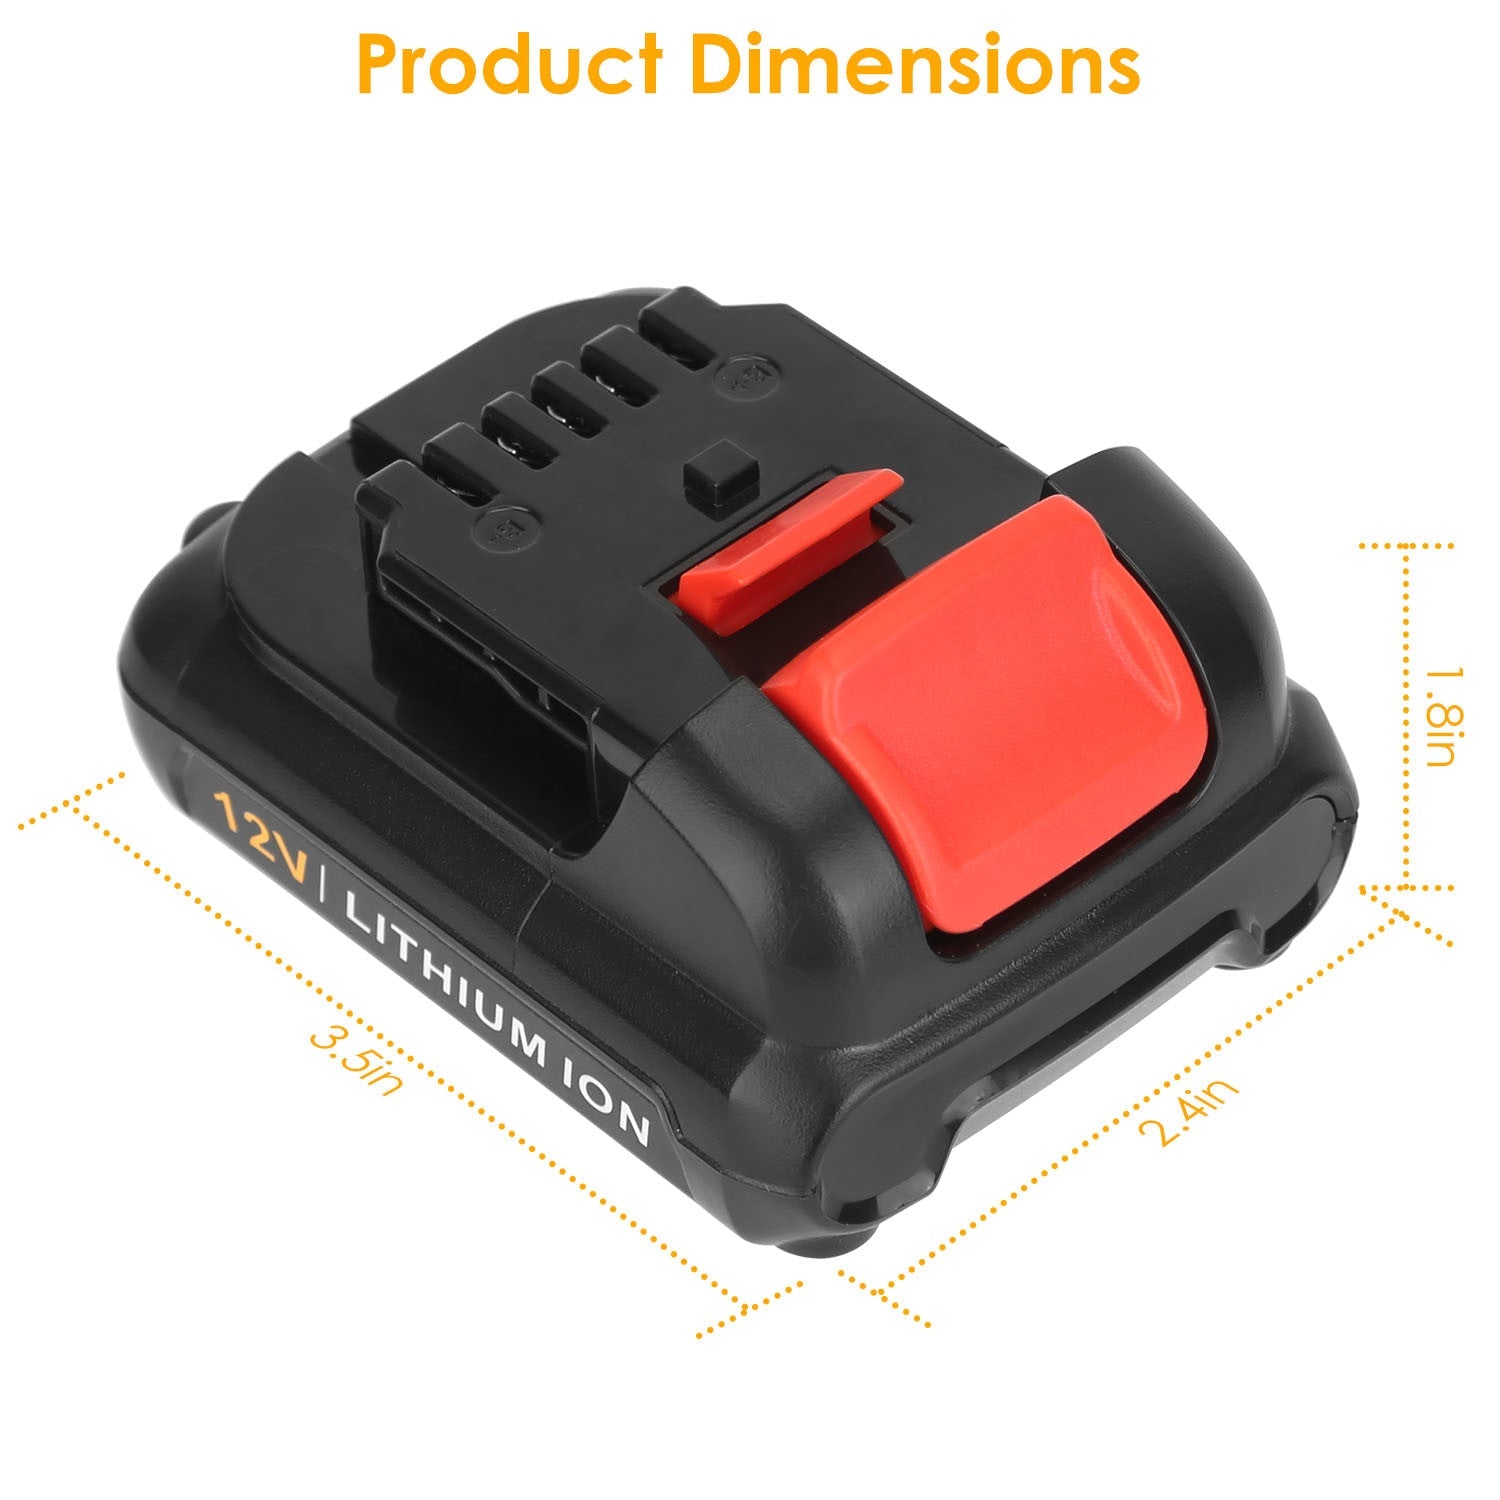 2 Packs 12V Li-ion Power Tool Battery Replacement Compatible with Dewalt Moorescarts